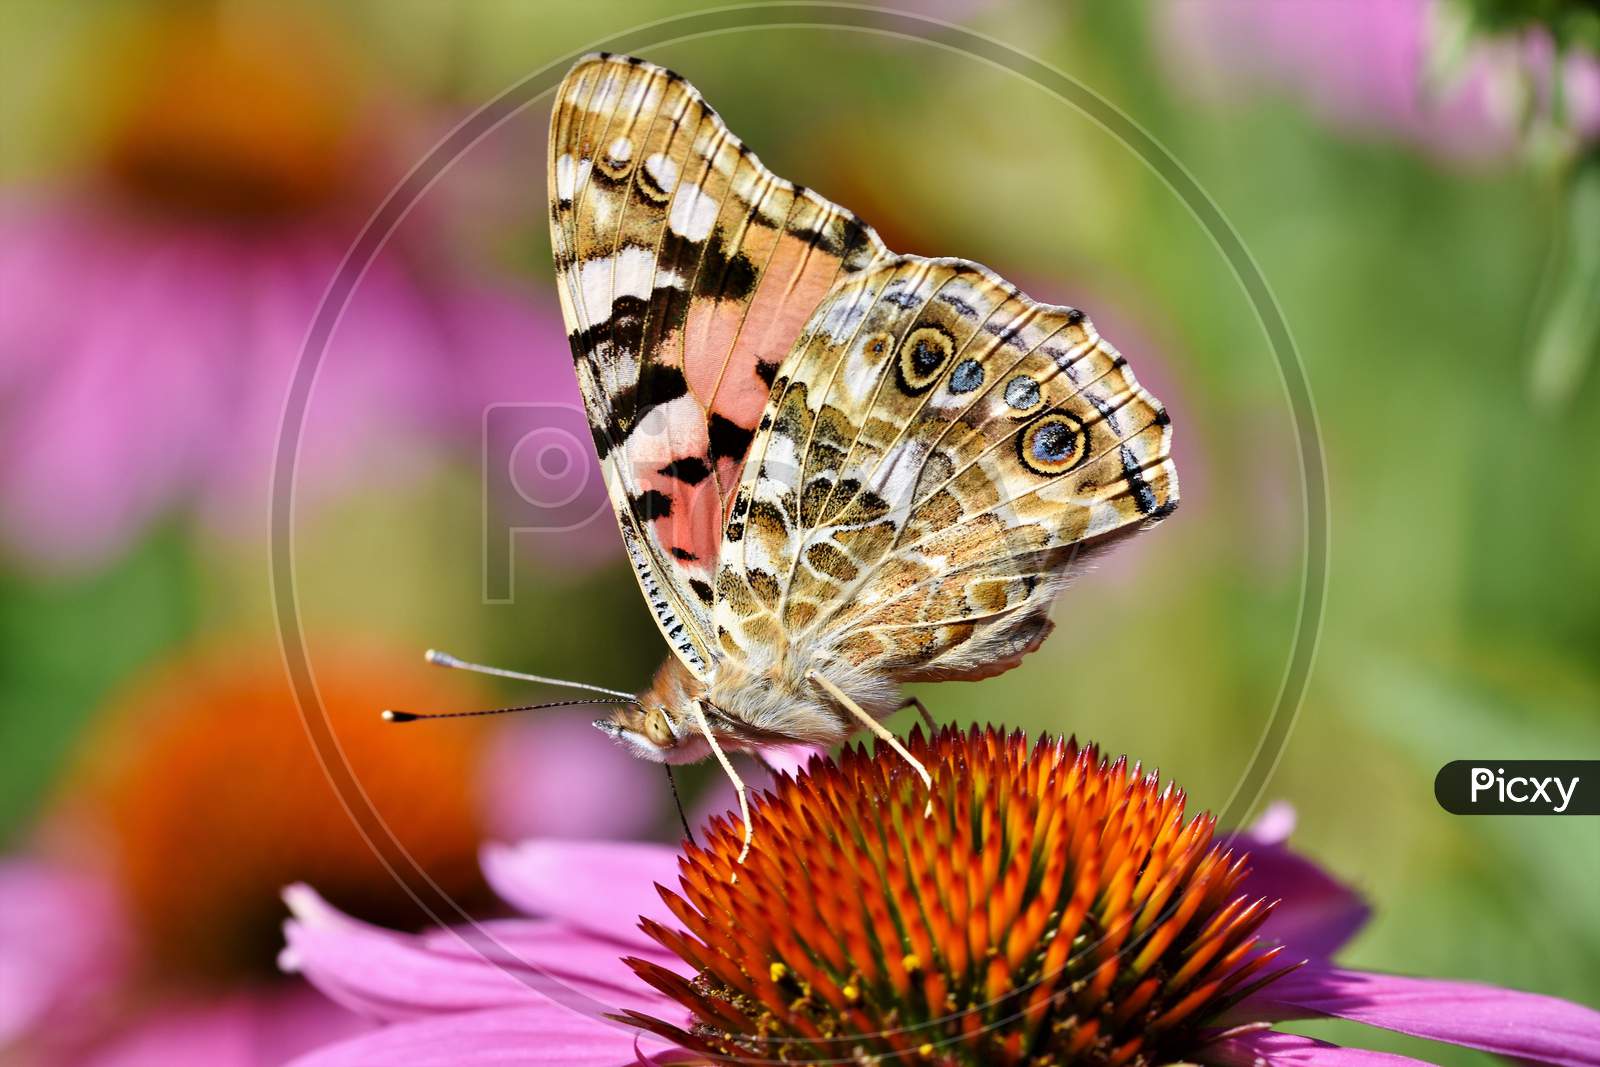 There Is A Beautiful Colorful Butterfly Sitting On The Flower.